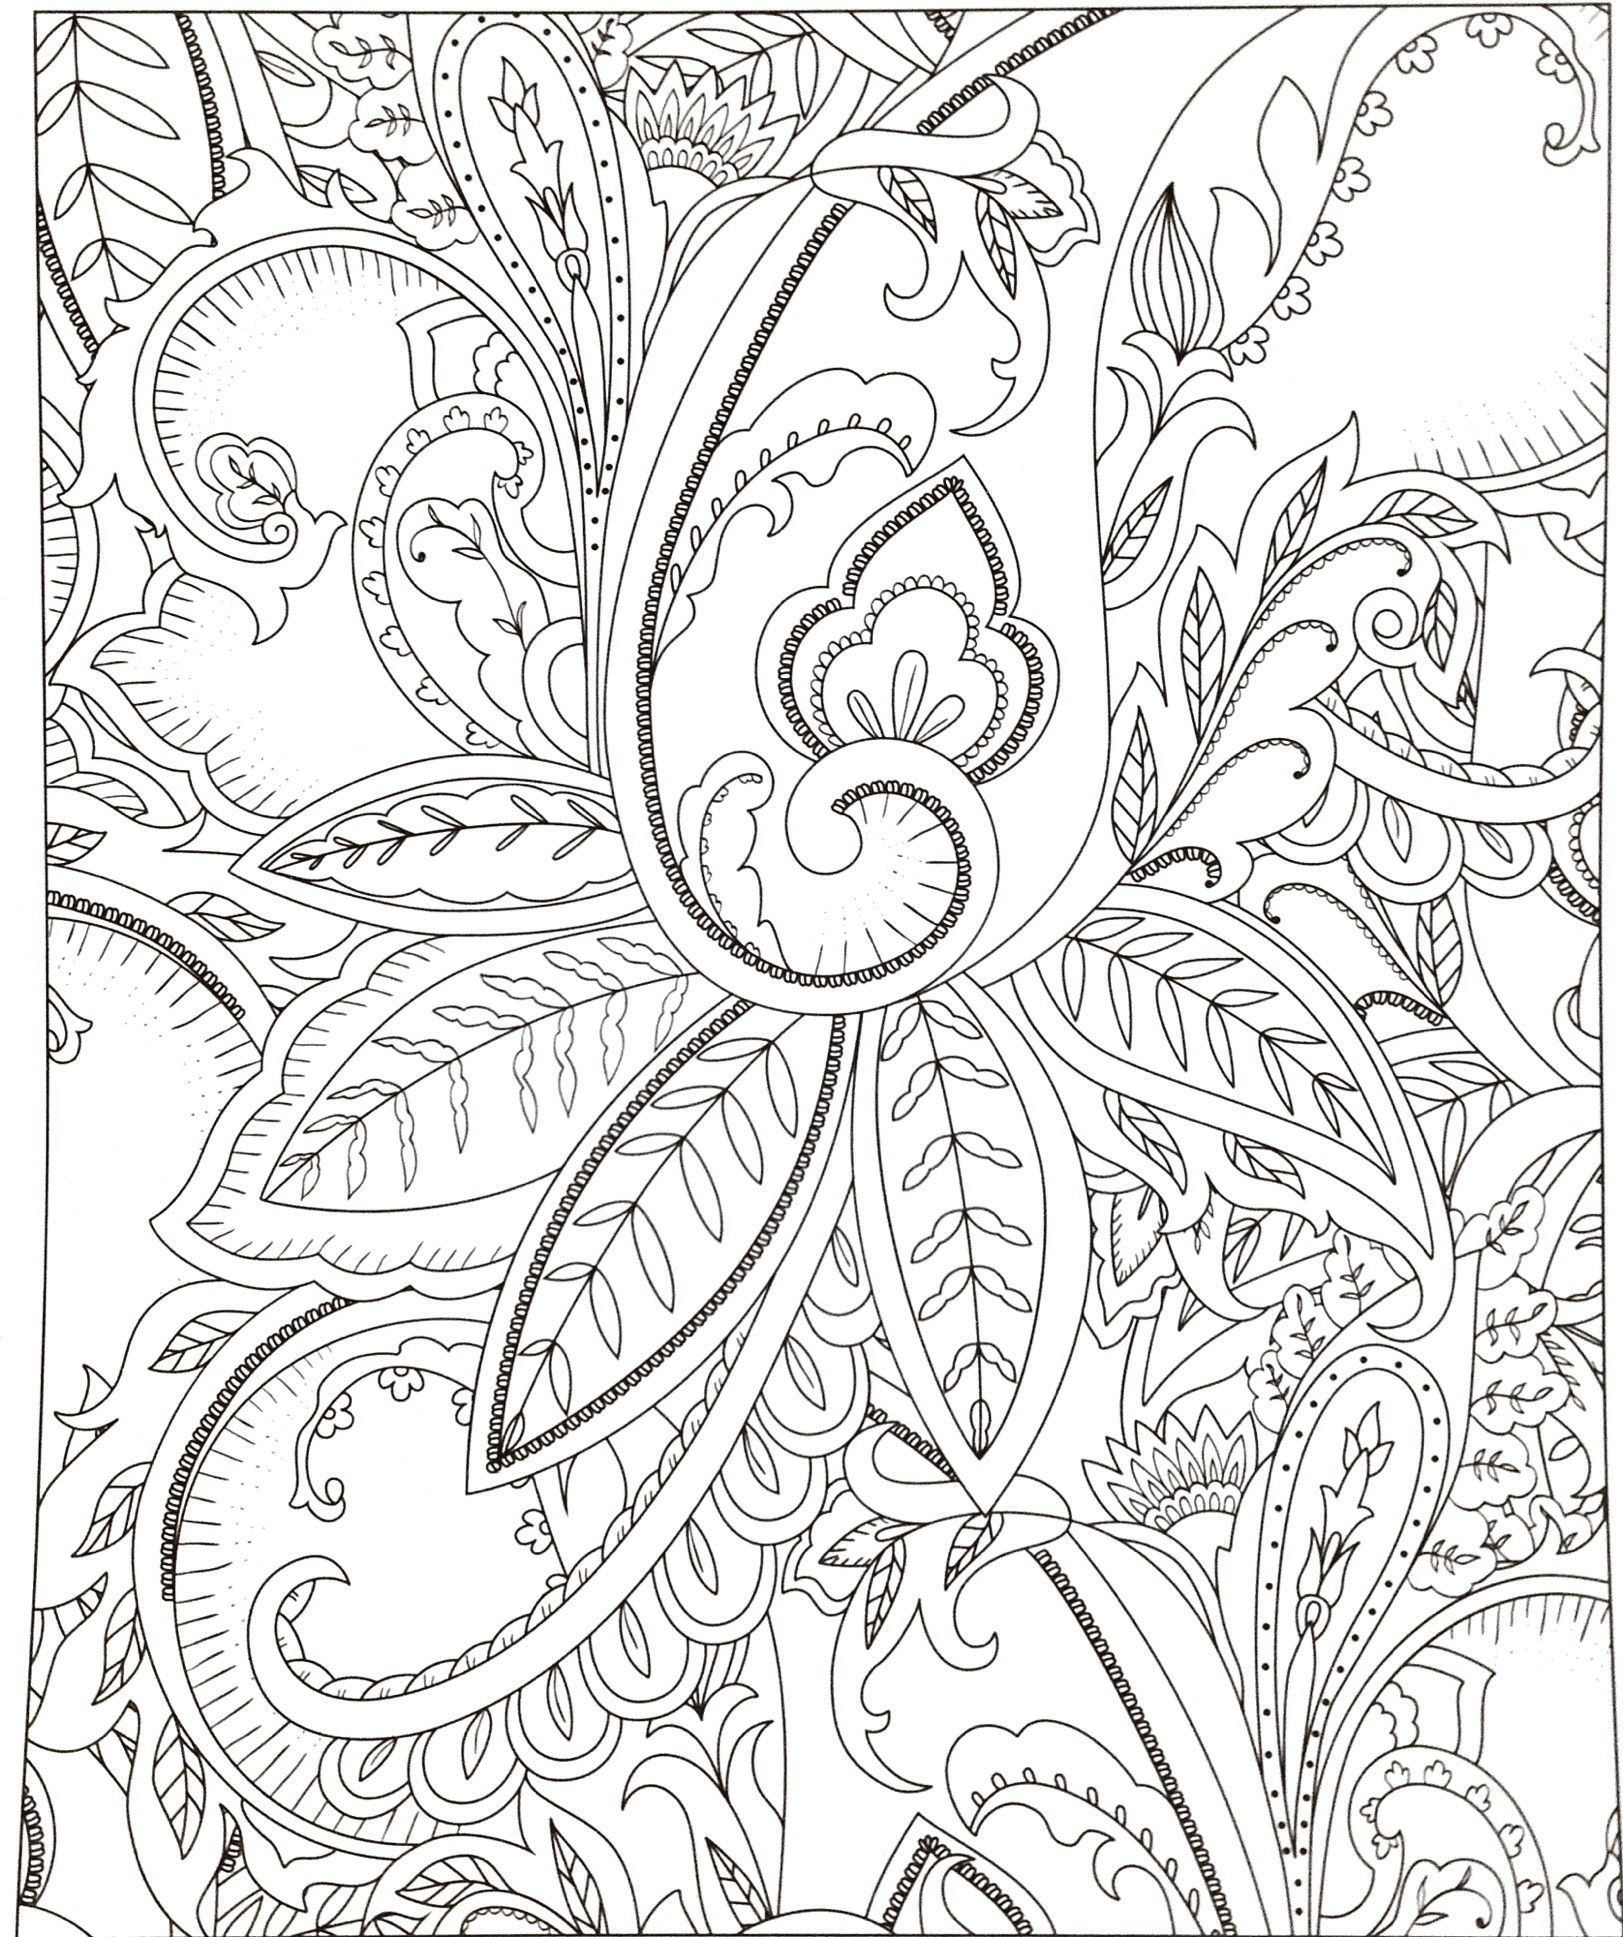 27 Great Vase with White Roses 2024 free download vase with white roses of cool vases flower vase coloring page pages flowers in a top i 0d ruva intended for cool vases flower vase coloring page pages flowers in a top i 0d